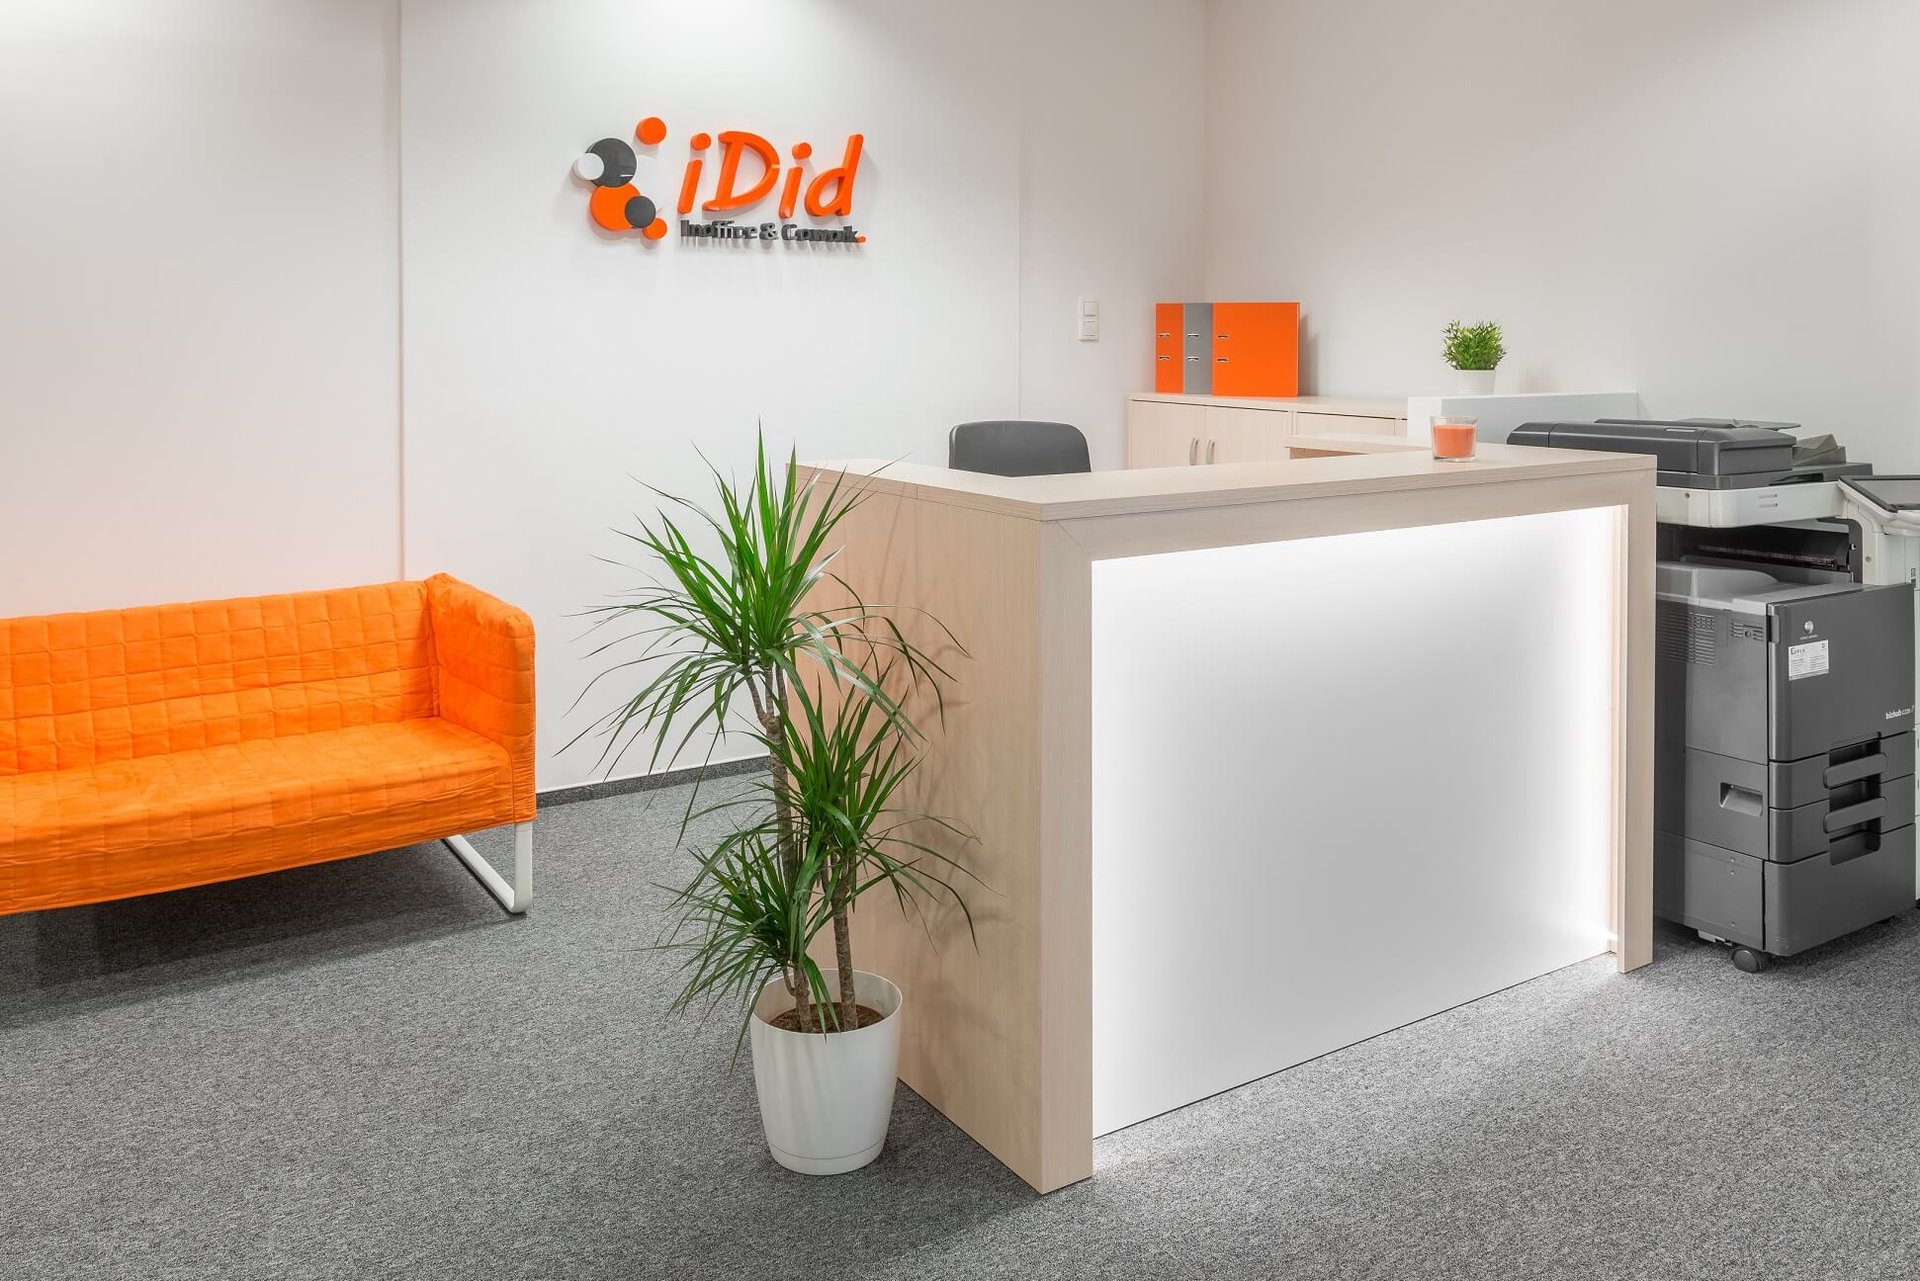 Office for 4 pers. in iDid Babka Tower